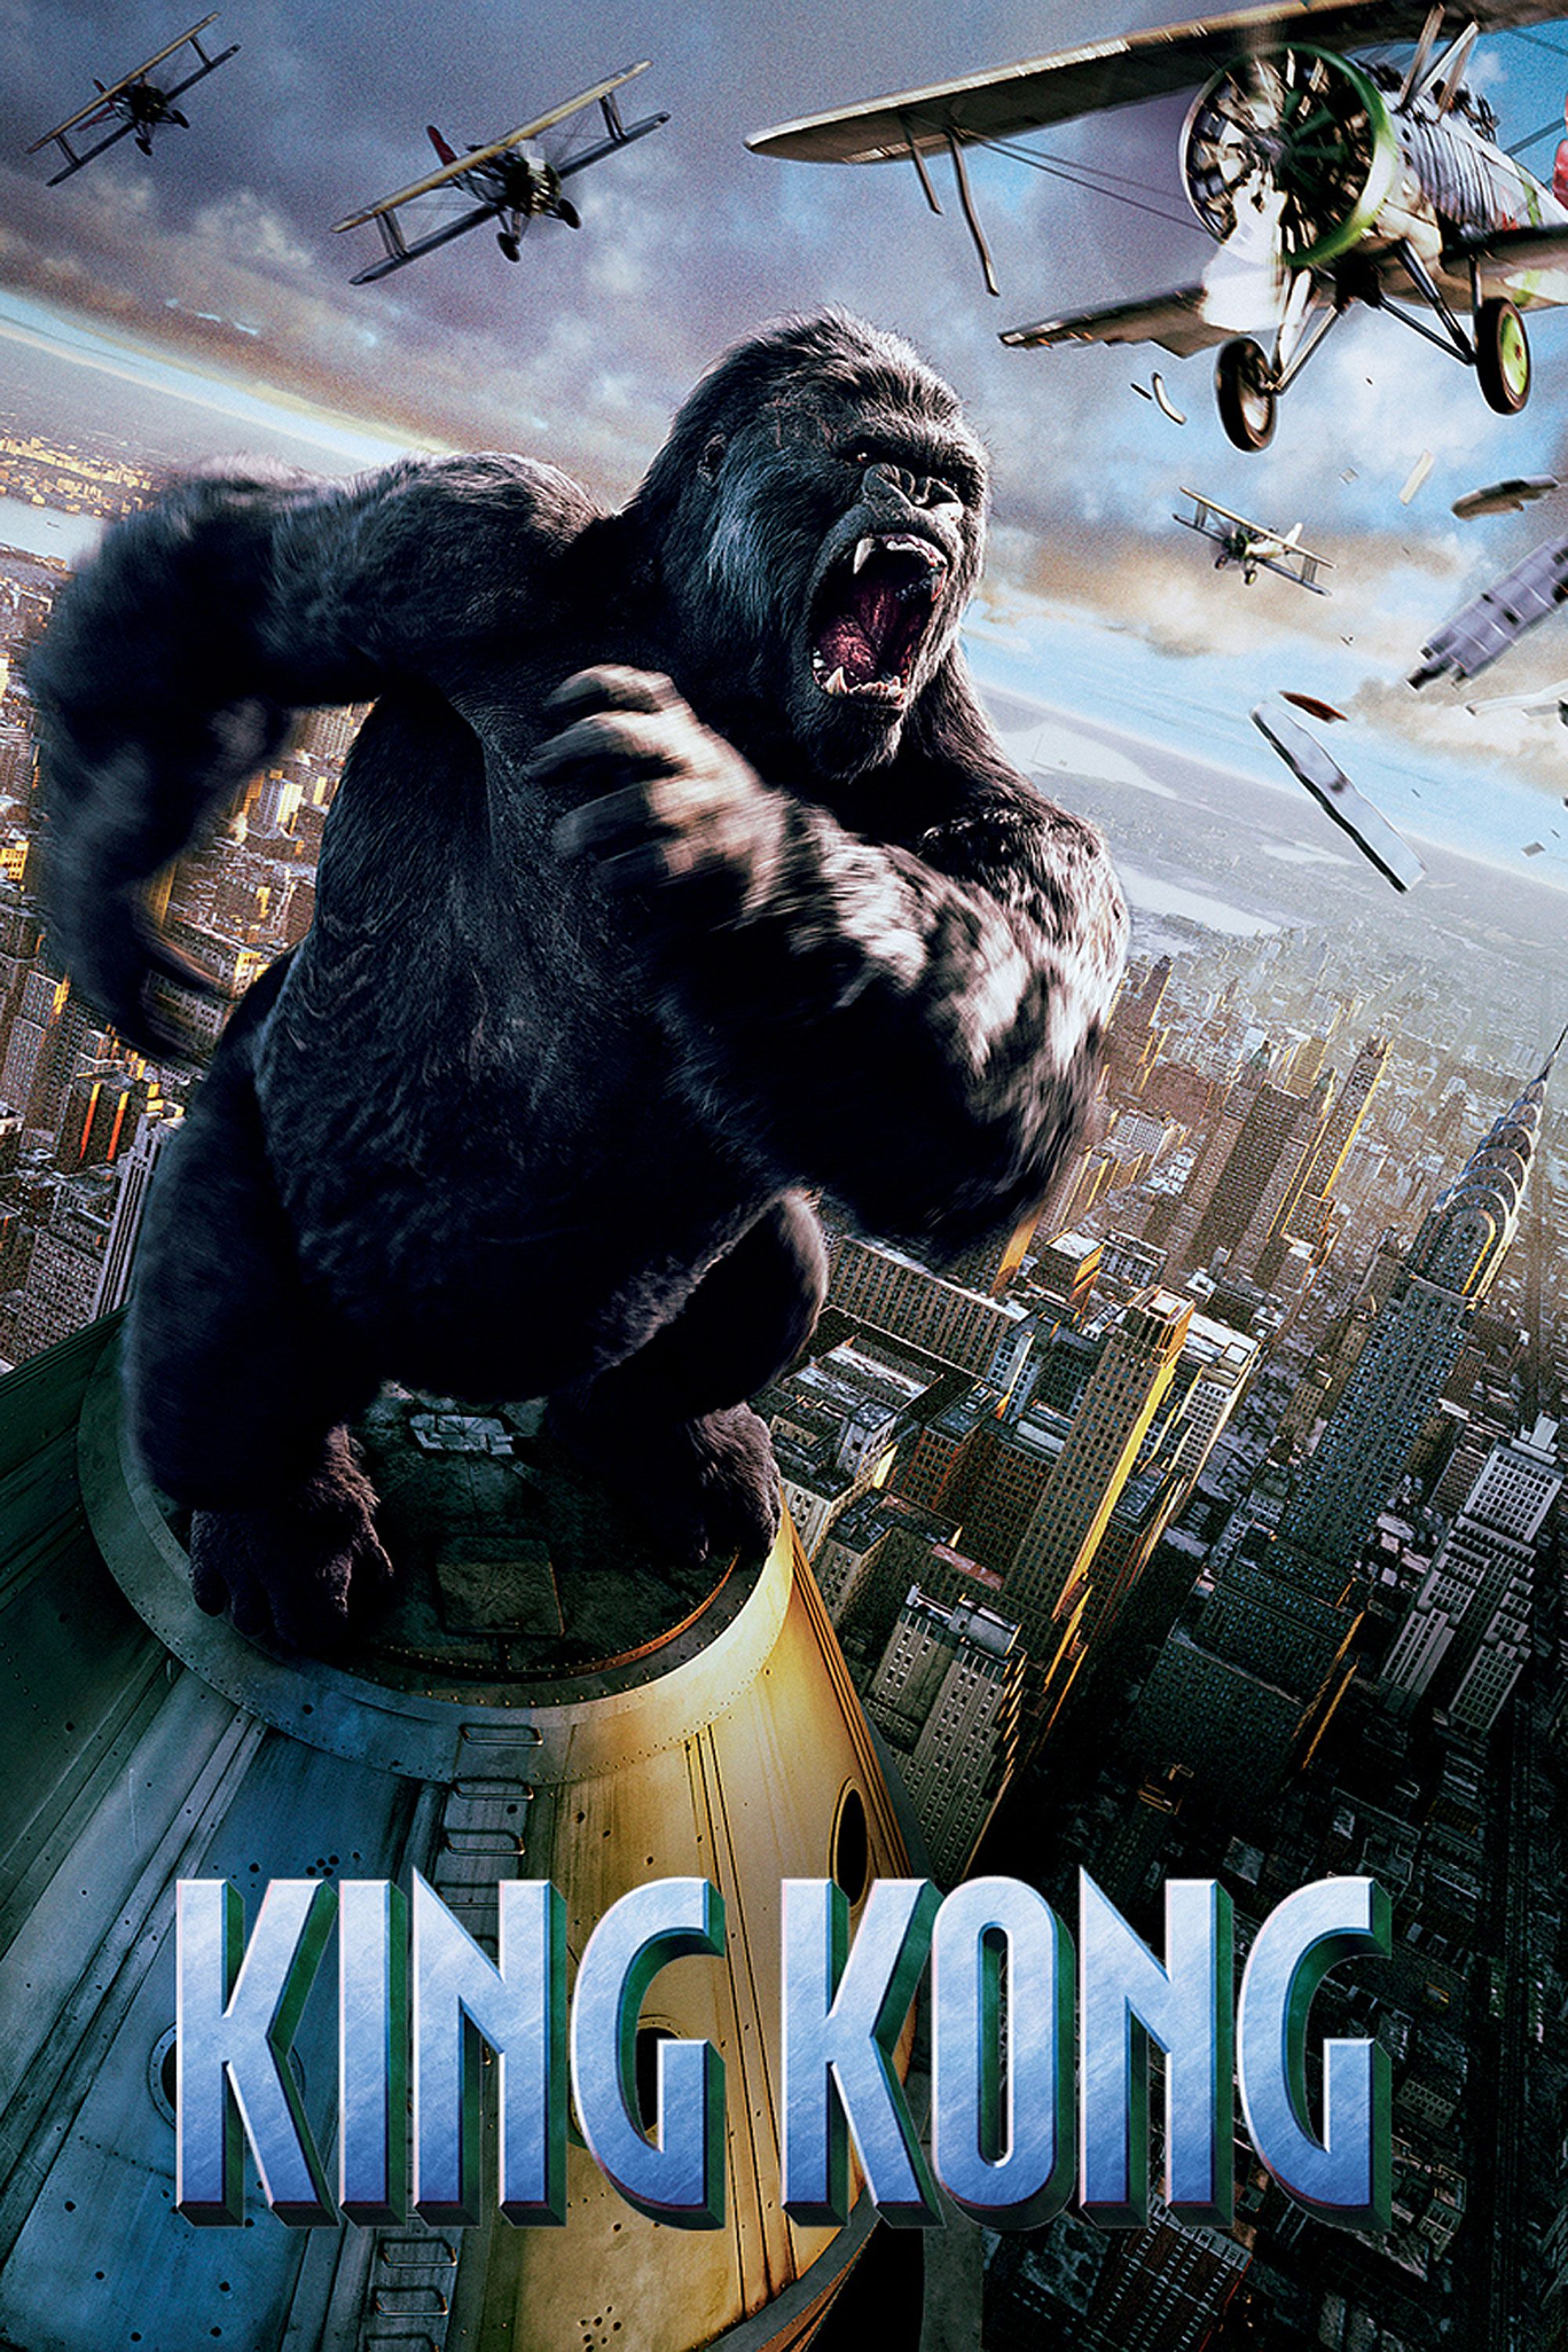 ashu friend recommends king kong hindi dubbed pic